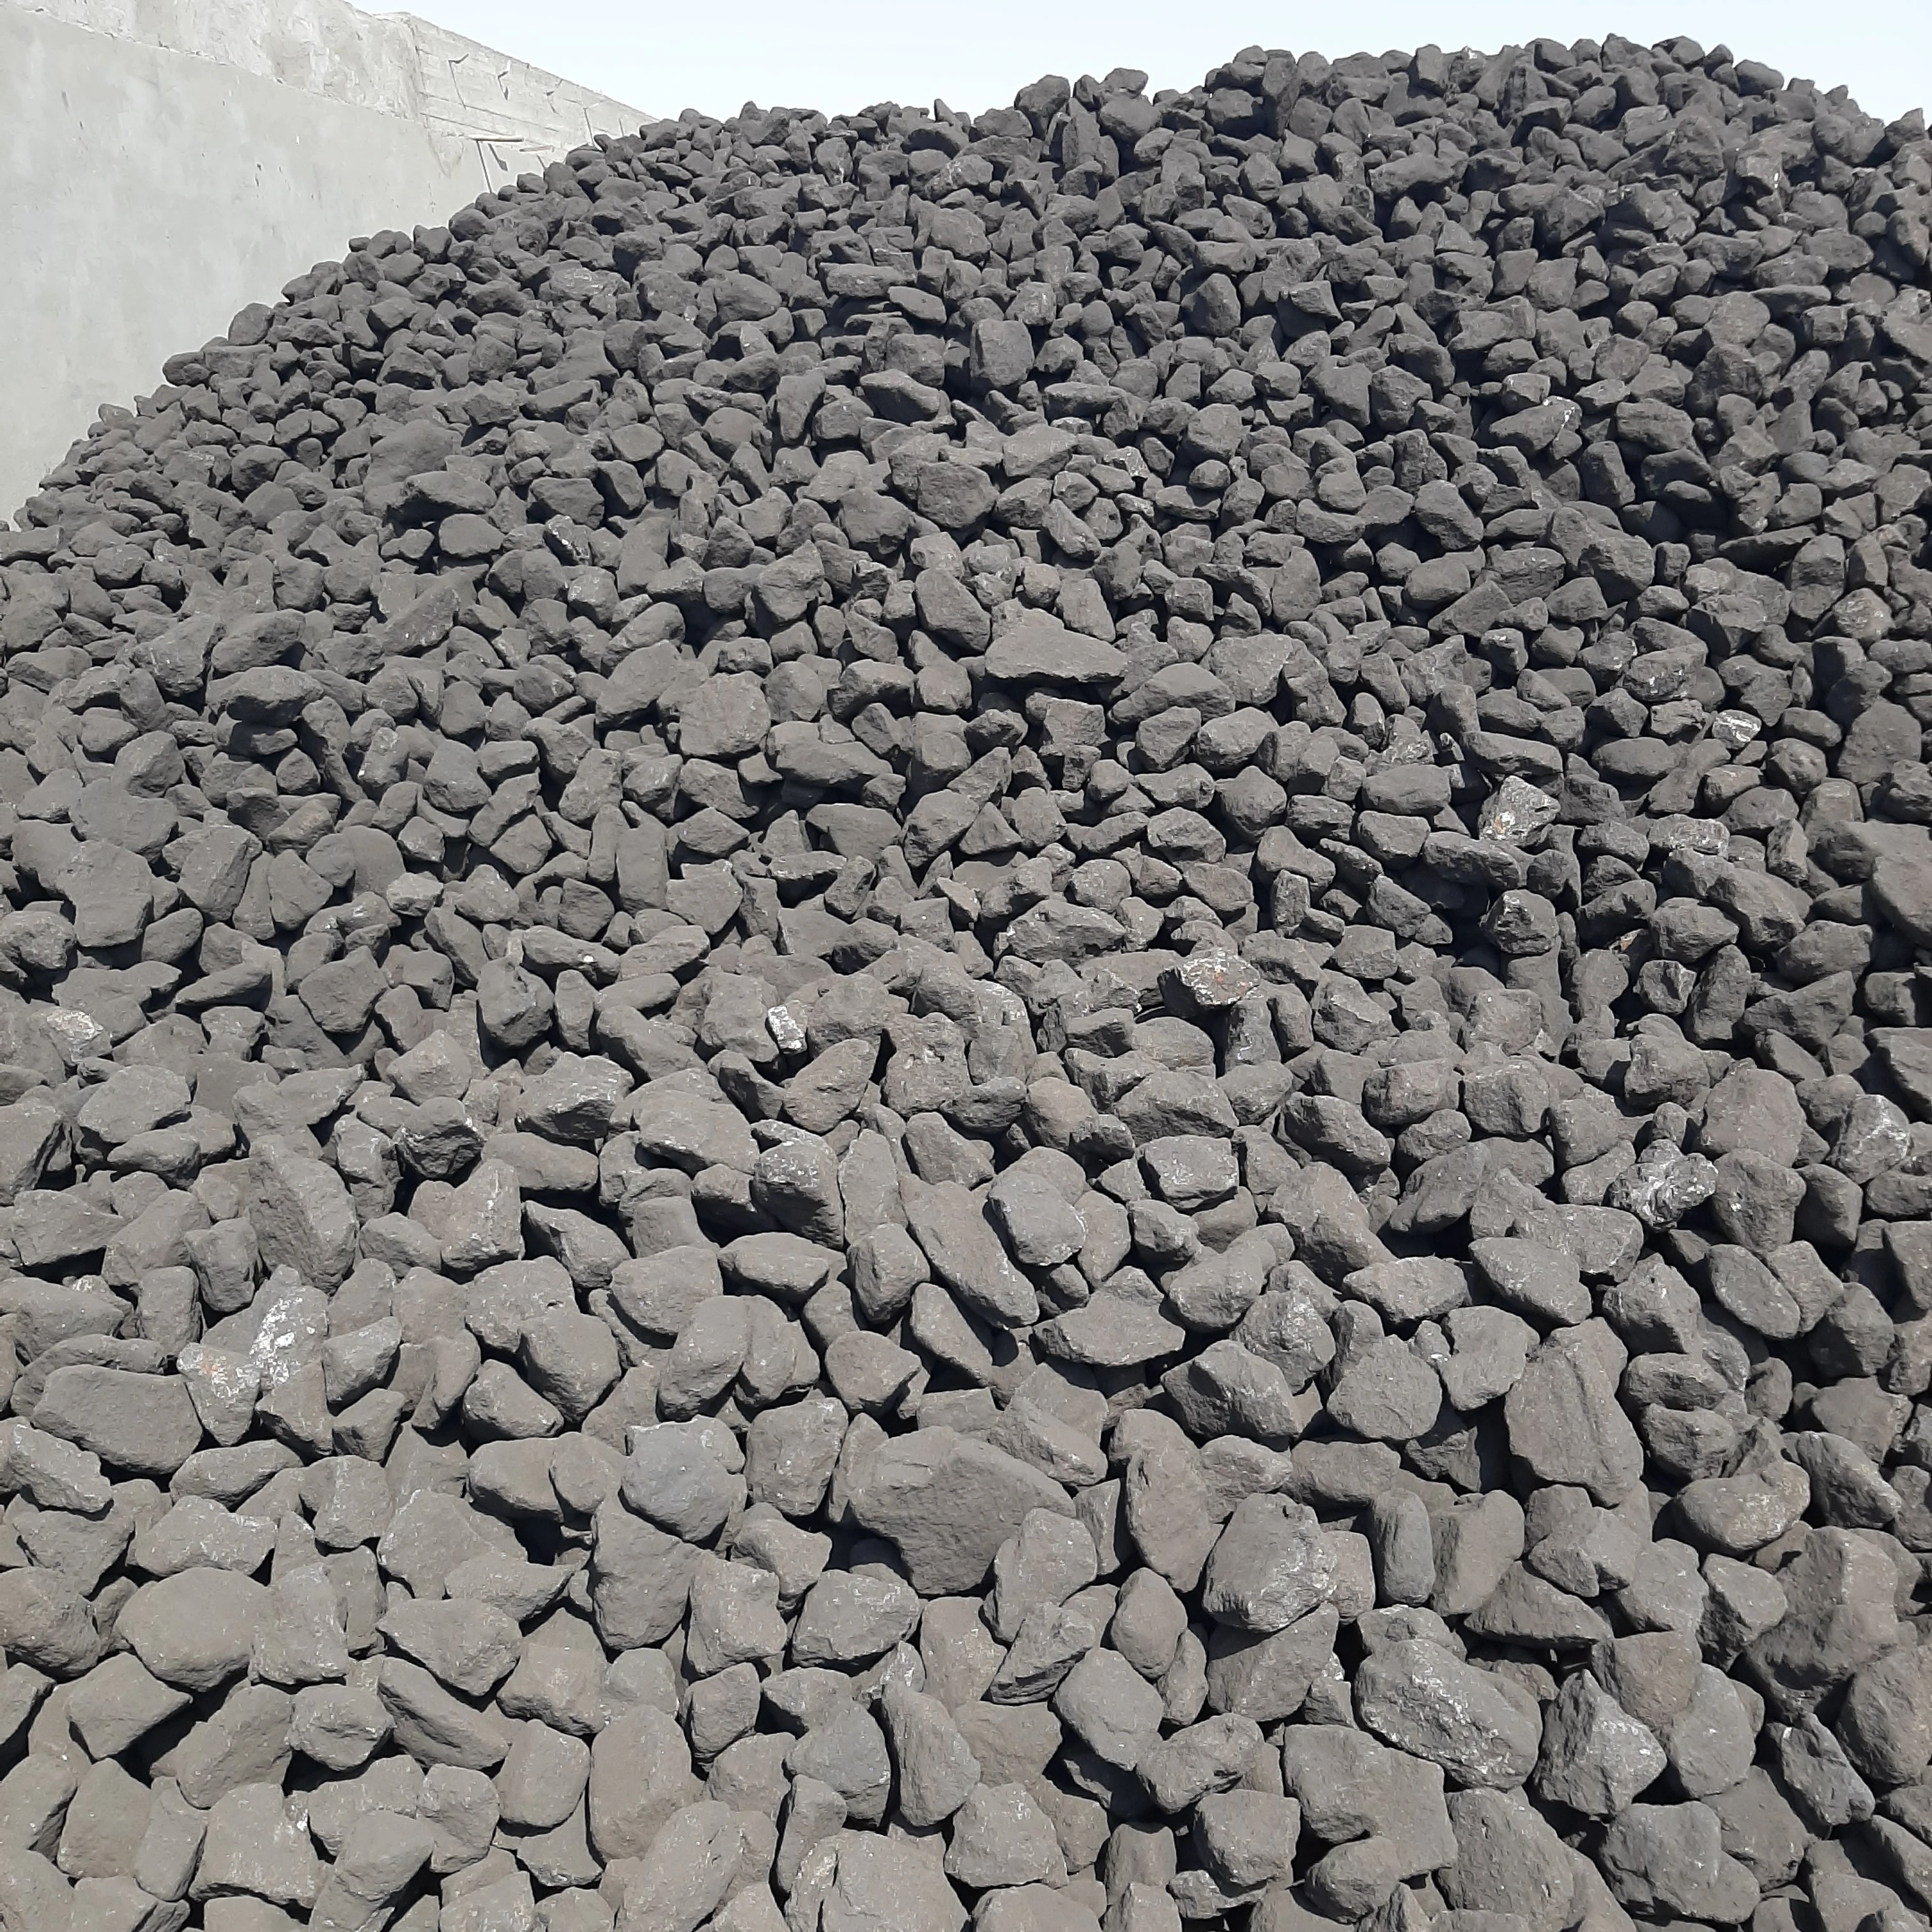 Manganese ore grade 25-28%, low iron, size 10-150 mm 3000 tons ready for export